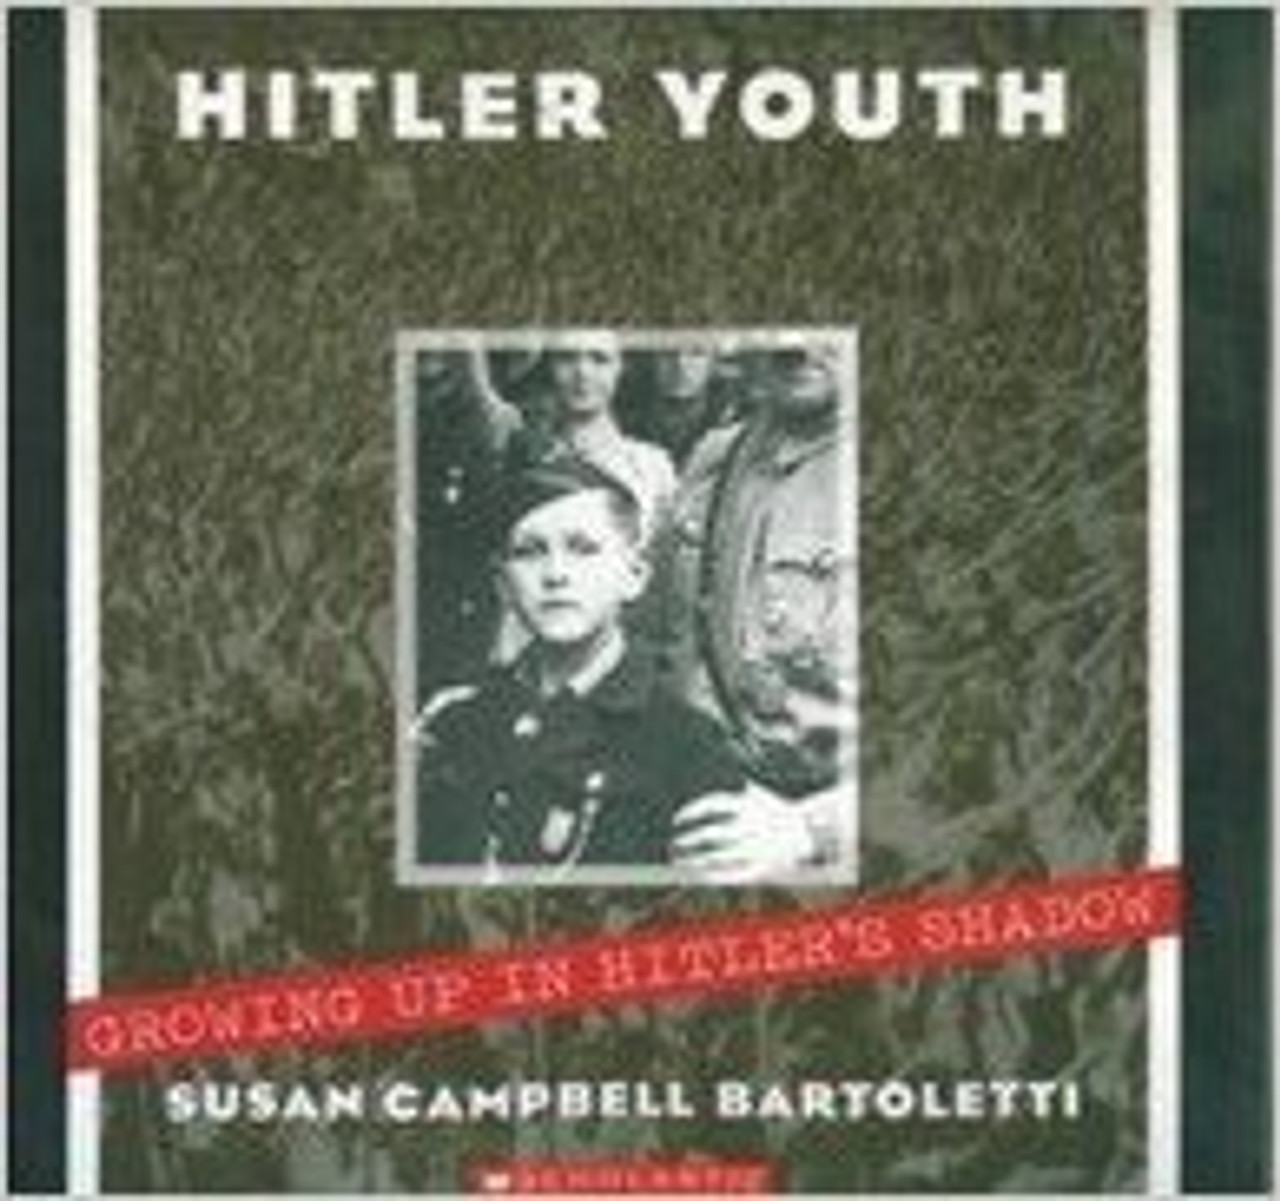 Bartoletti explores how Hitler gained the loyalty, trust, and passion of so many of Germany's young people.